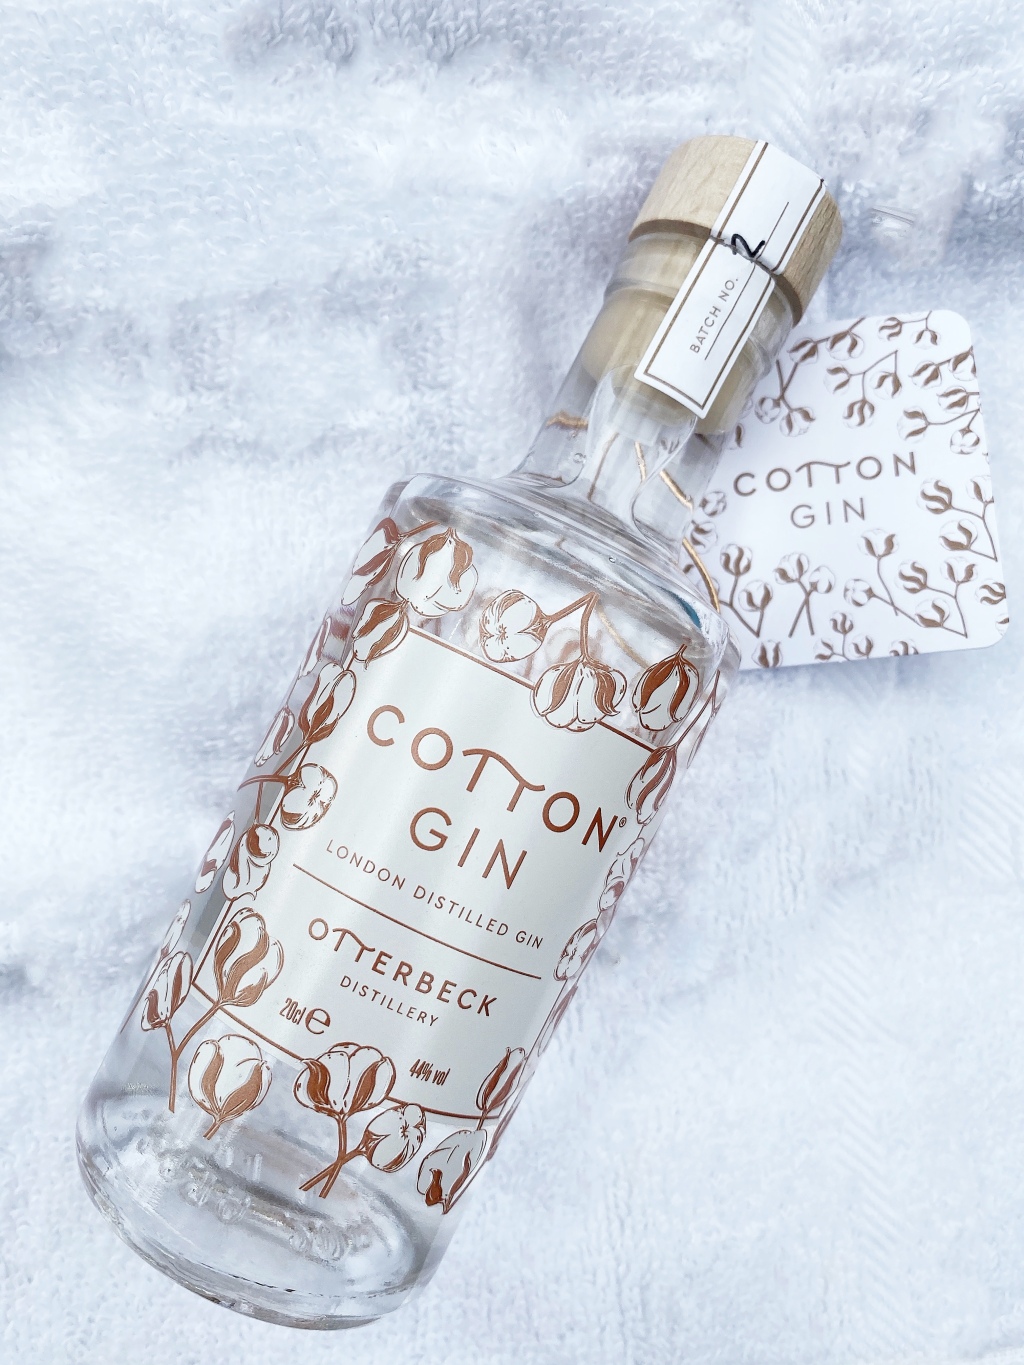 Gin Review – Cotton Gin